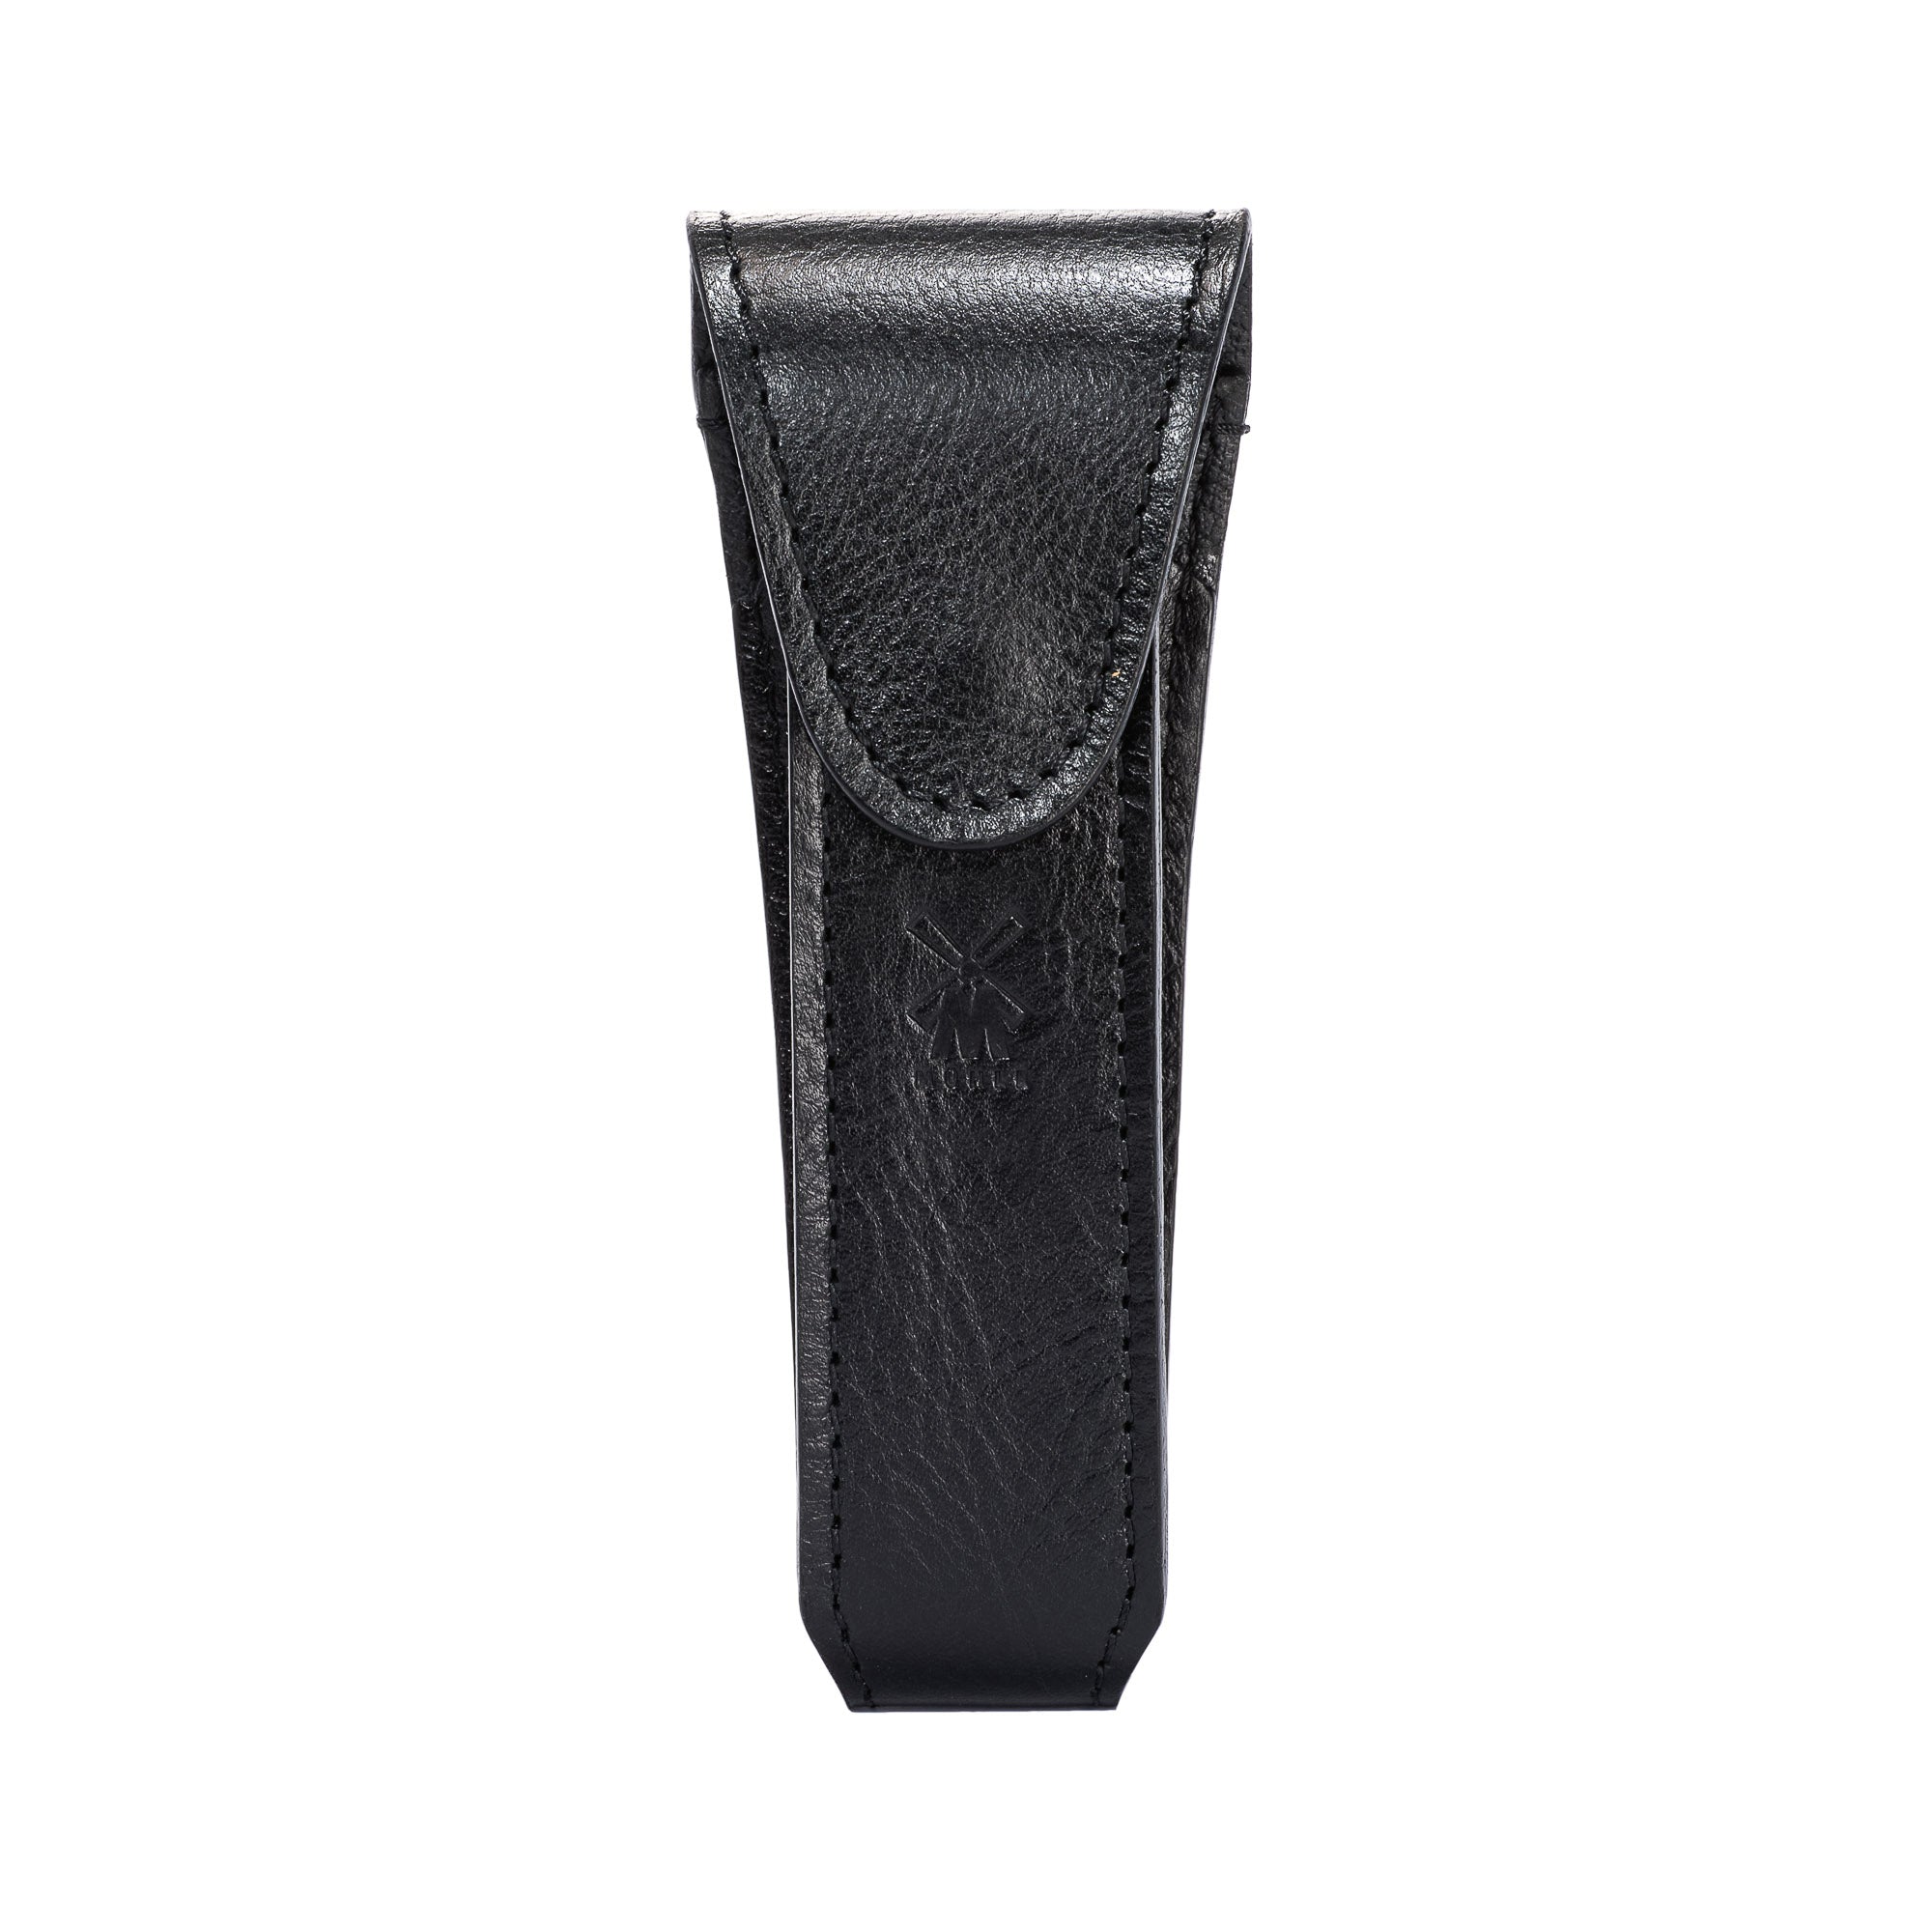 TRAVEL - Leather Pouch for Traditional Safety Razor